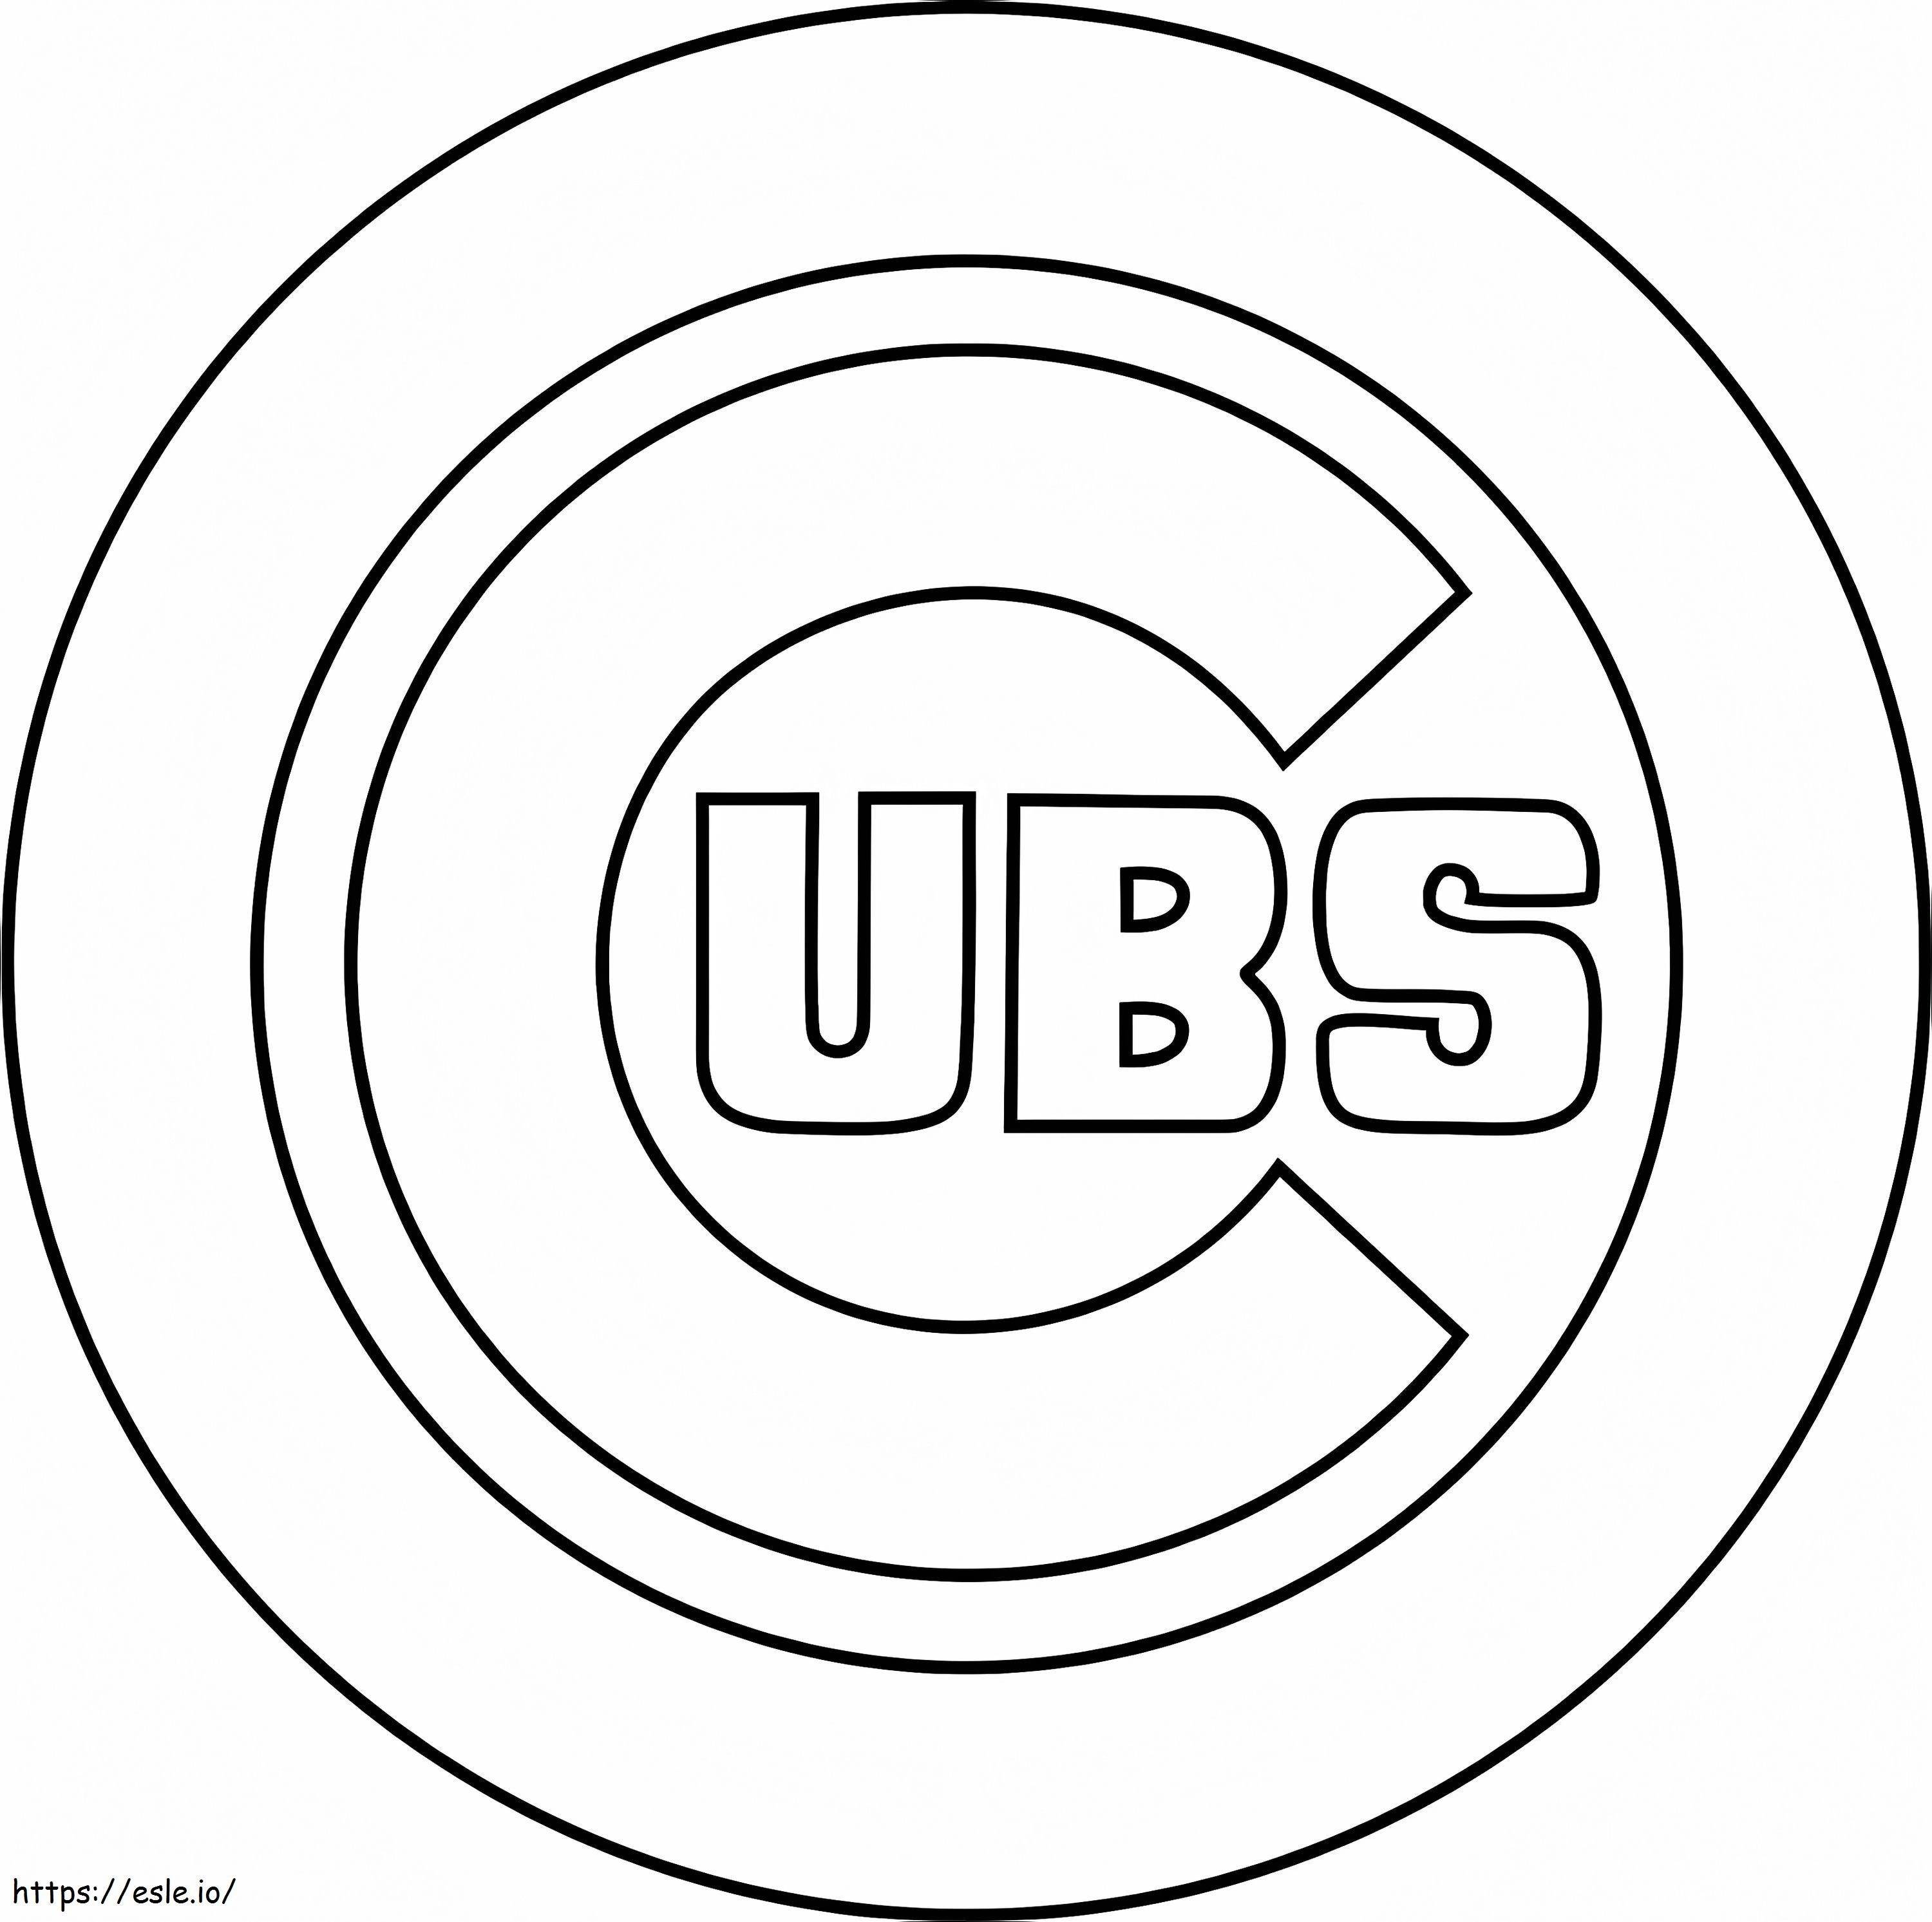 Chicago Cubs 3 coloring page